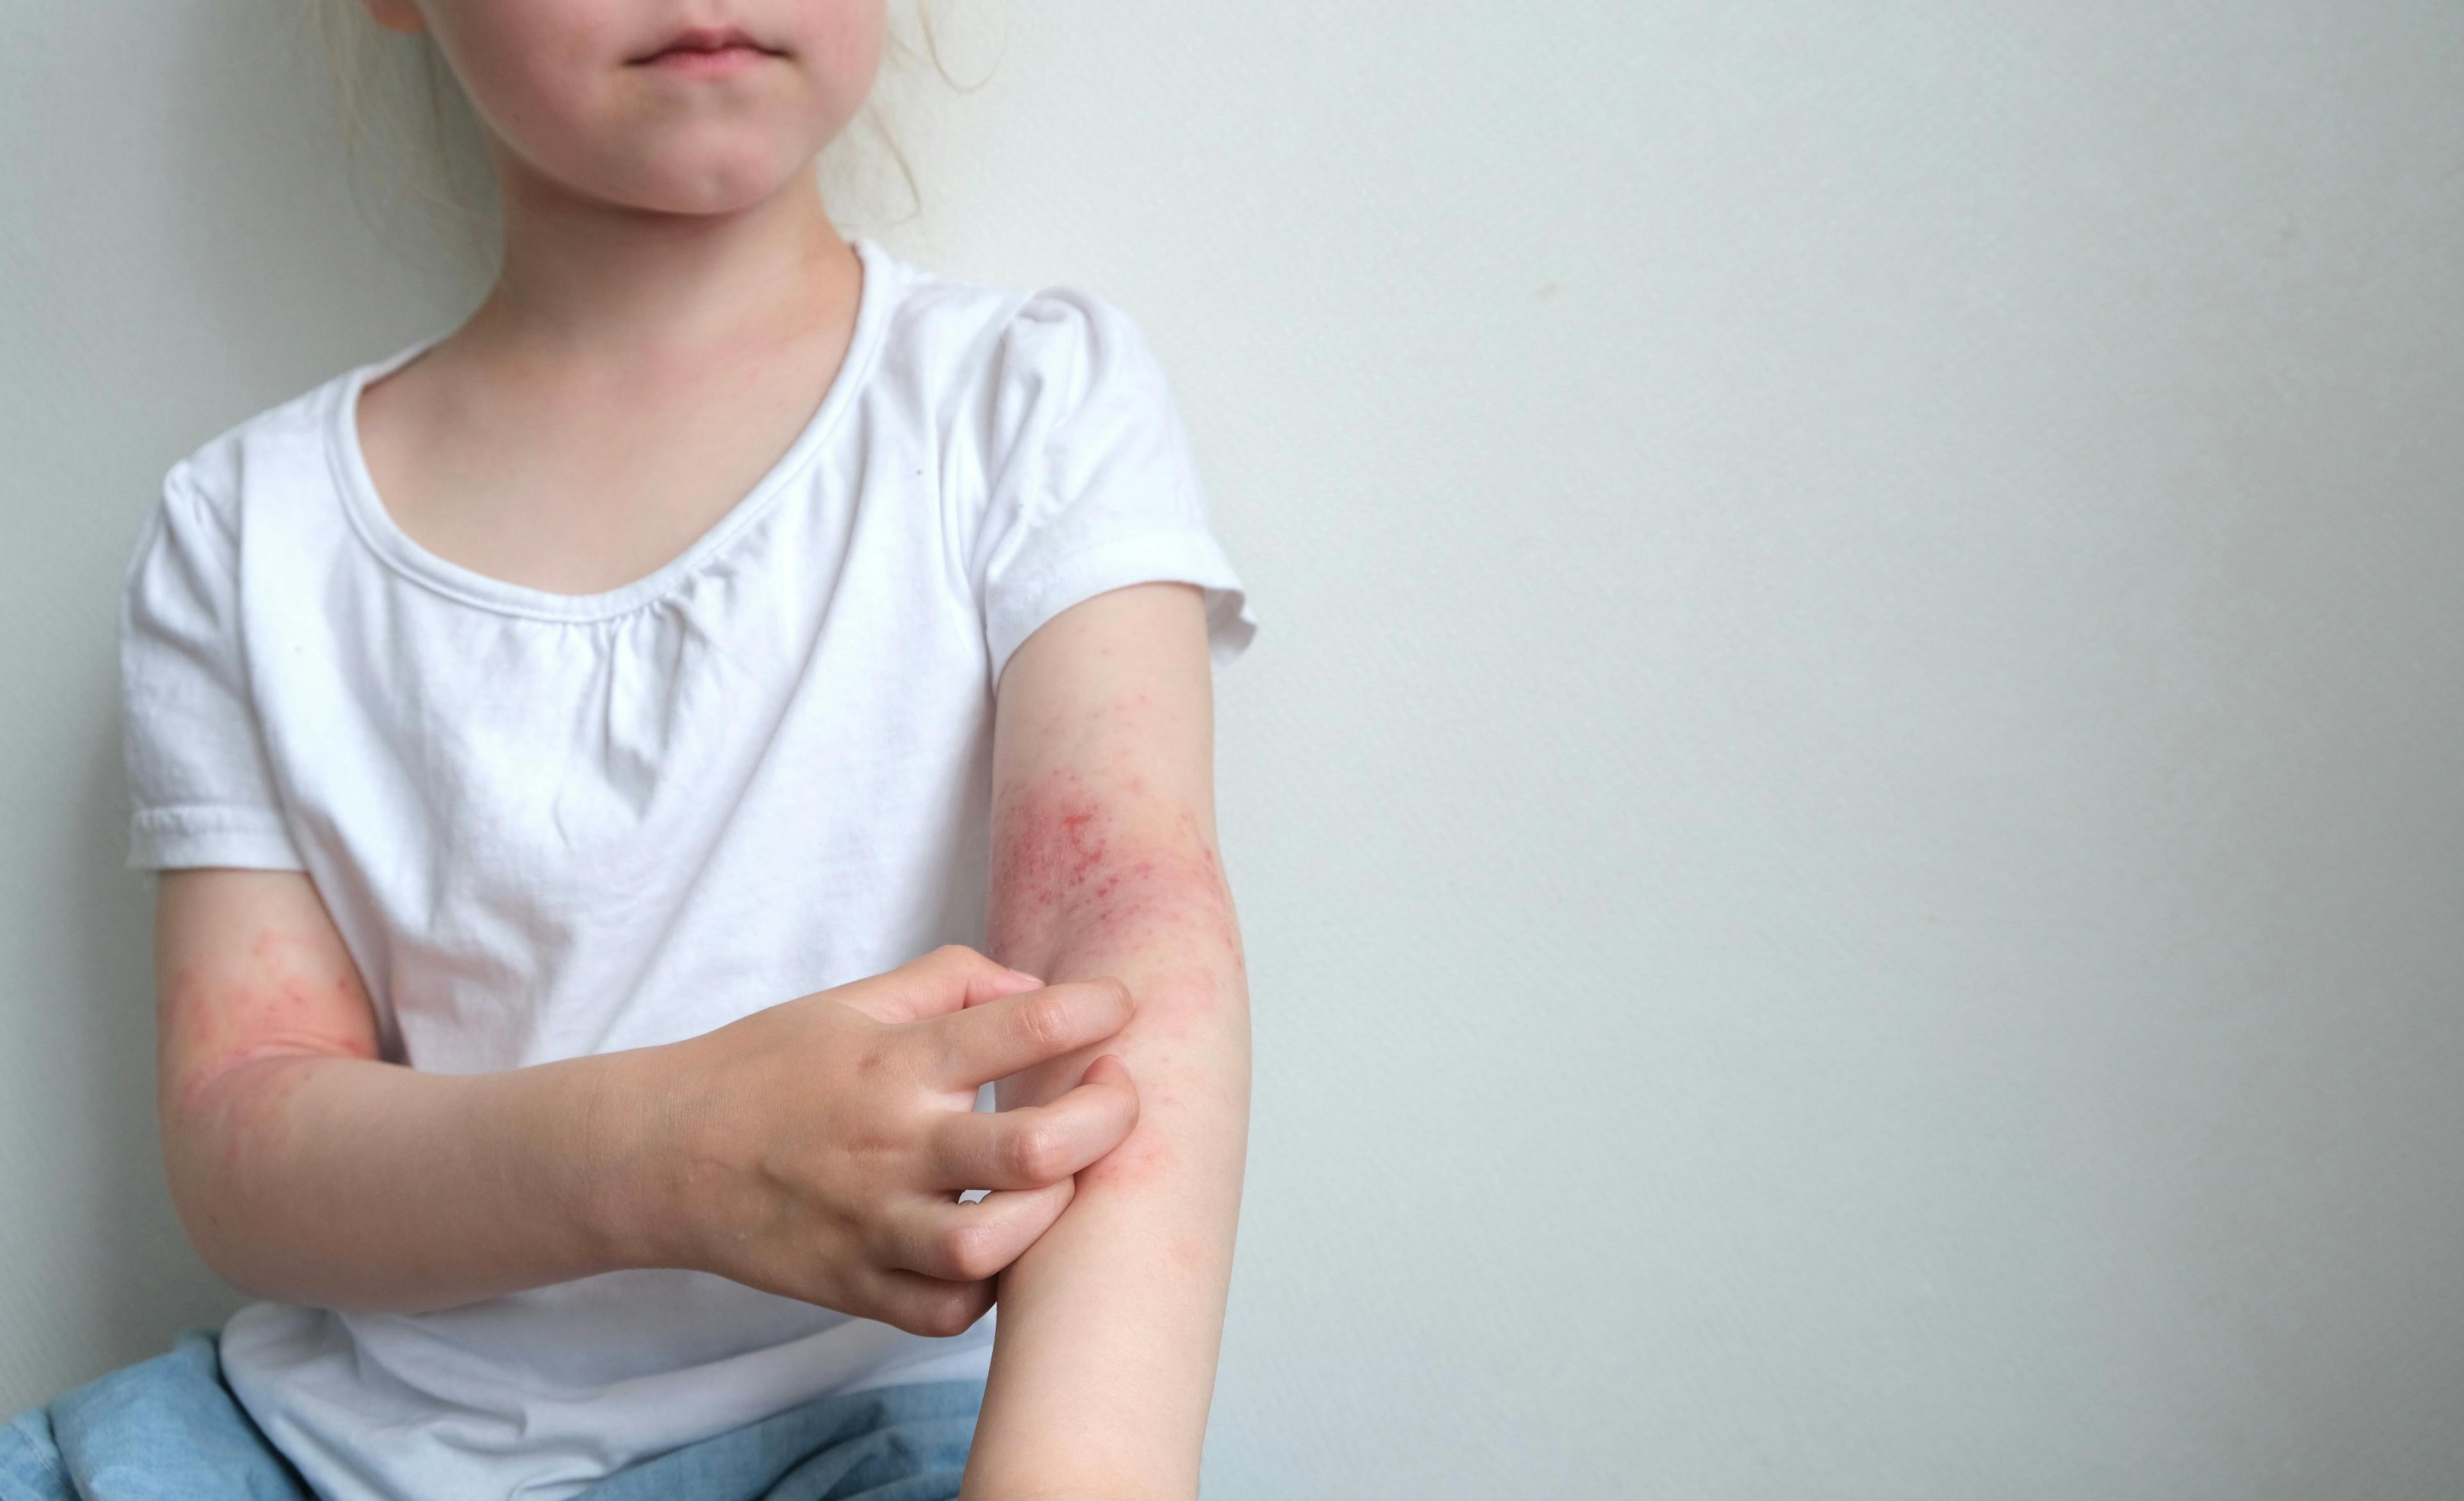 Baricitinib Offers Hope for Pediatric Atopic Dermatitis Patients